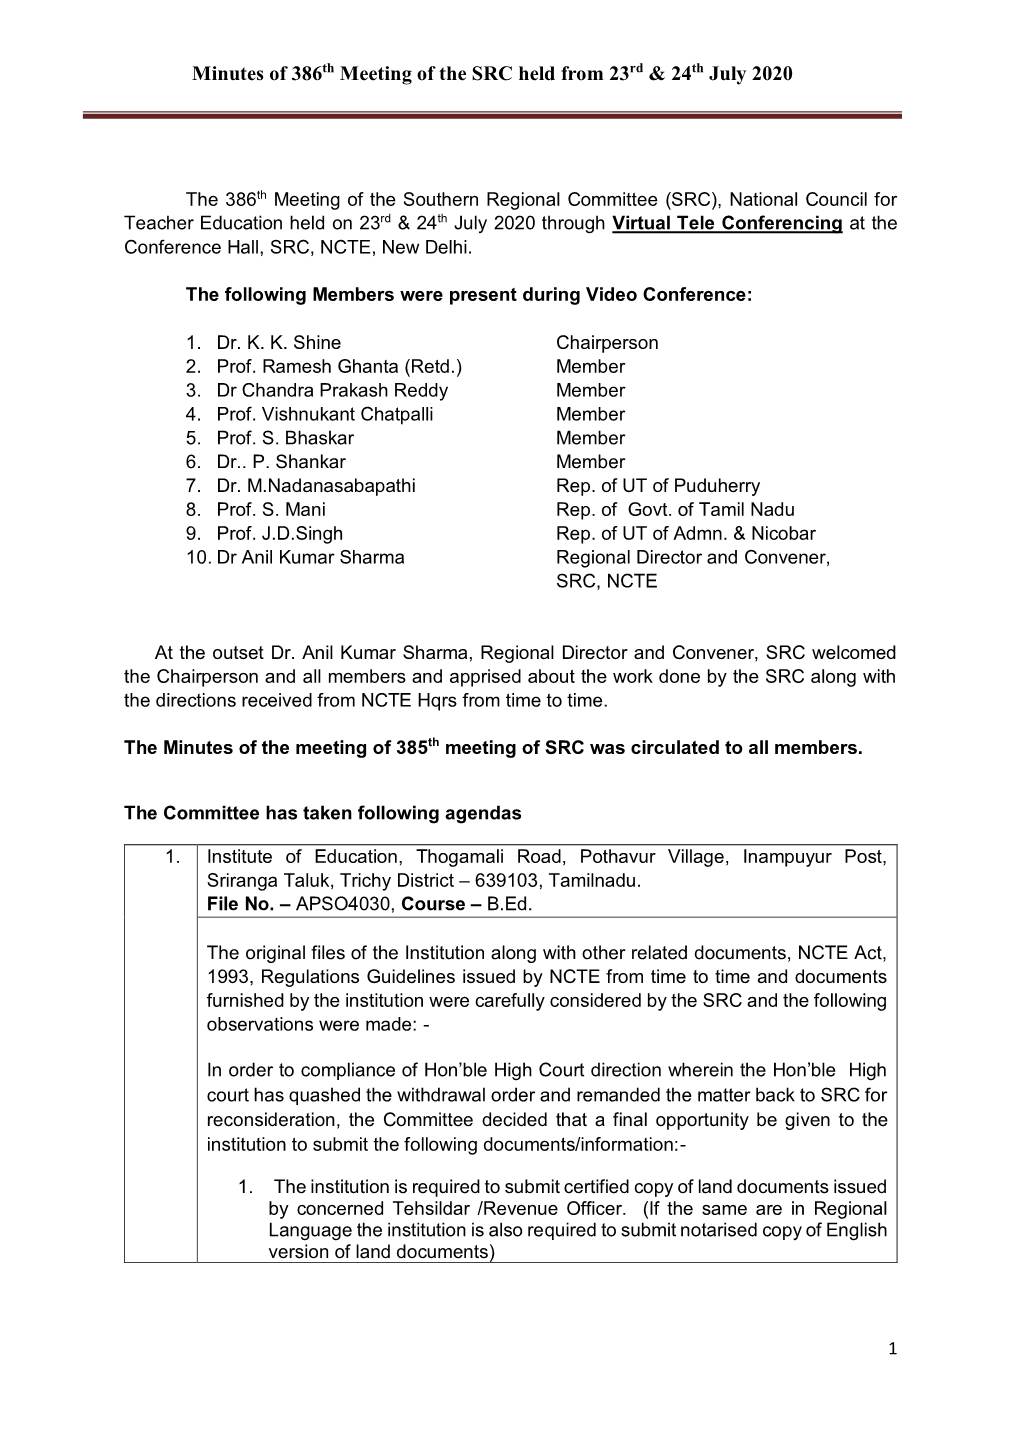 Minutes of 386Th Meeting of the SRC Held from 23Rd & 24Th July 2020